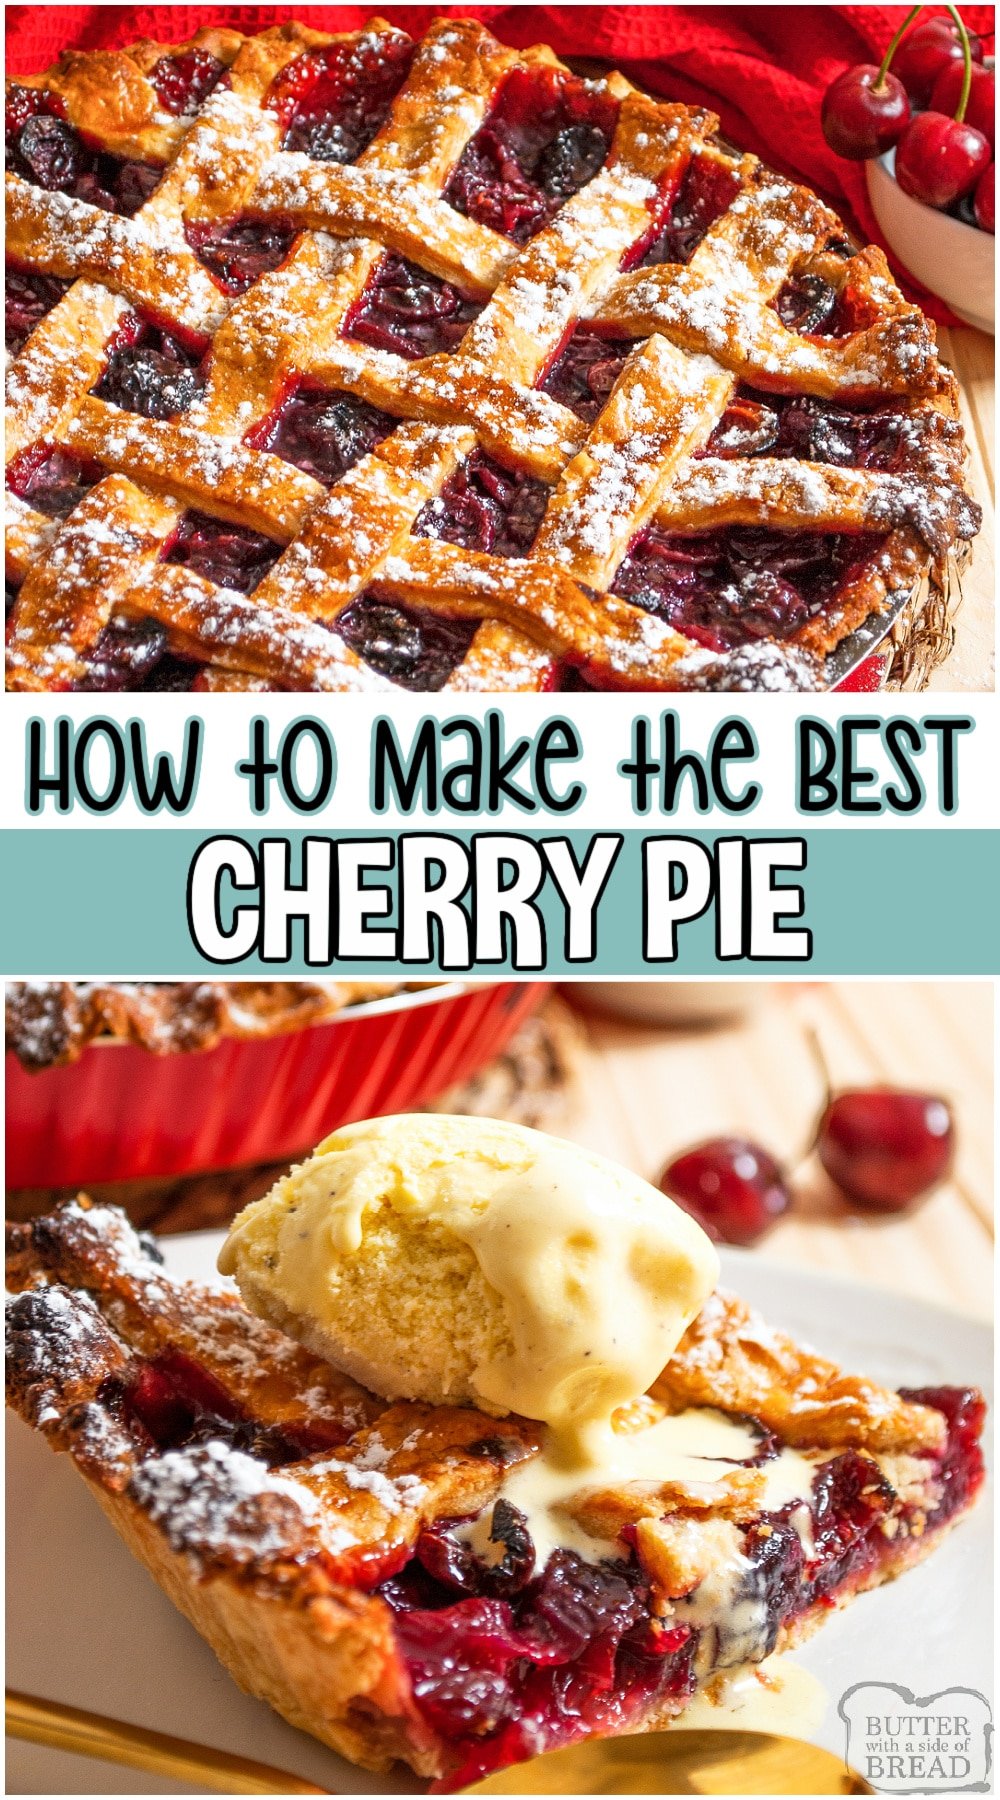 Classic cherry pie made from scratch, with the flakiest homemade crust and a delicious fresh cherry filling. Our buttery pie crust is the best and you can't beat a homemade sweet cherry pie. Serve with vanilla ice cream for the ultimate treat! #pie #cherries #cherrypie #baking #dessert #homemade #easyrecipe from BUTTER WITH A SIDE OF BREAD